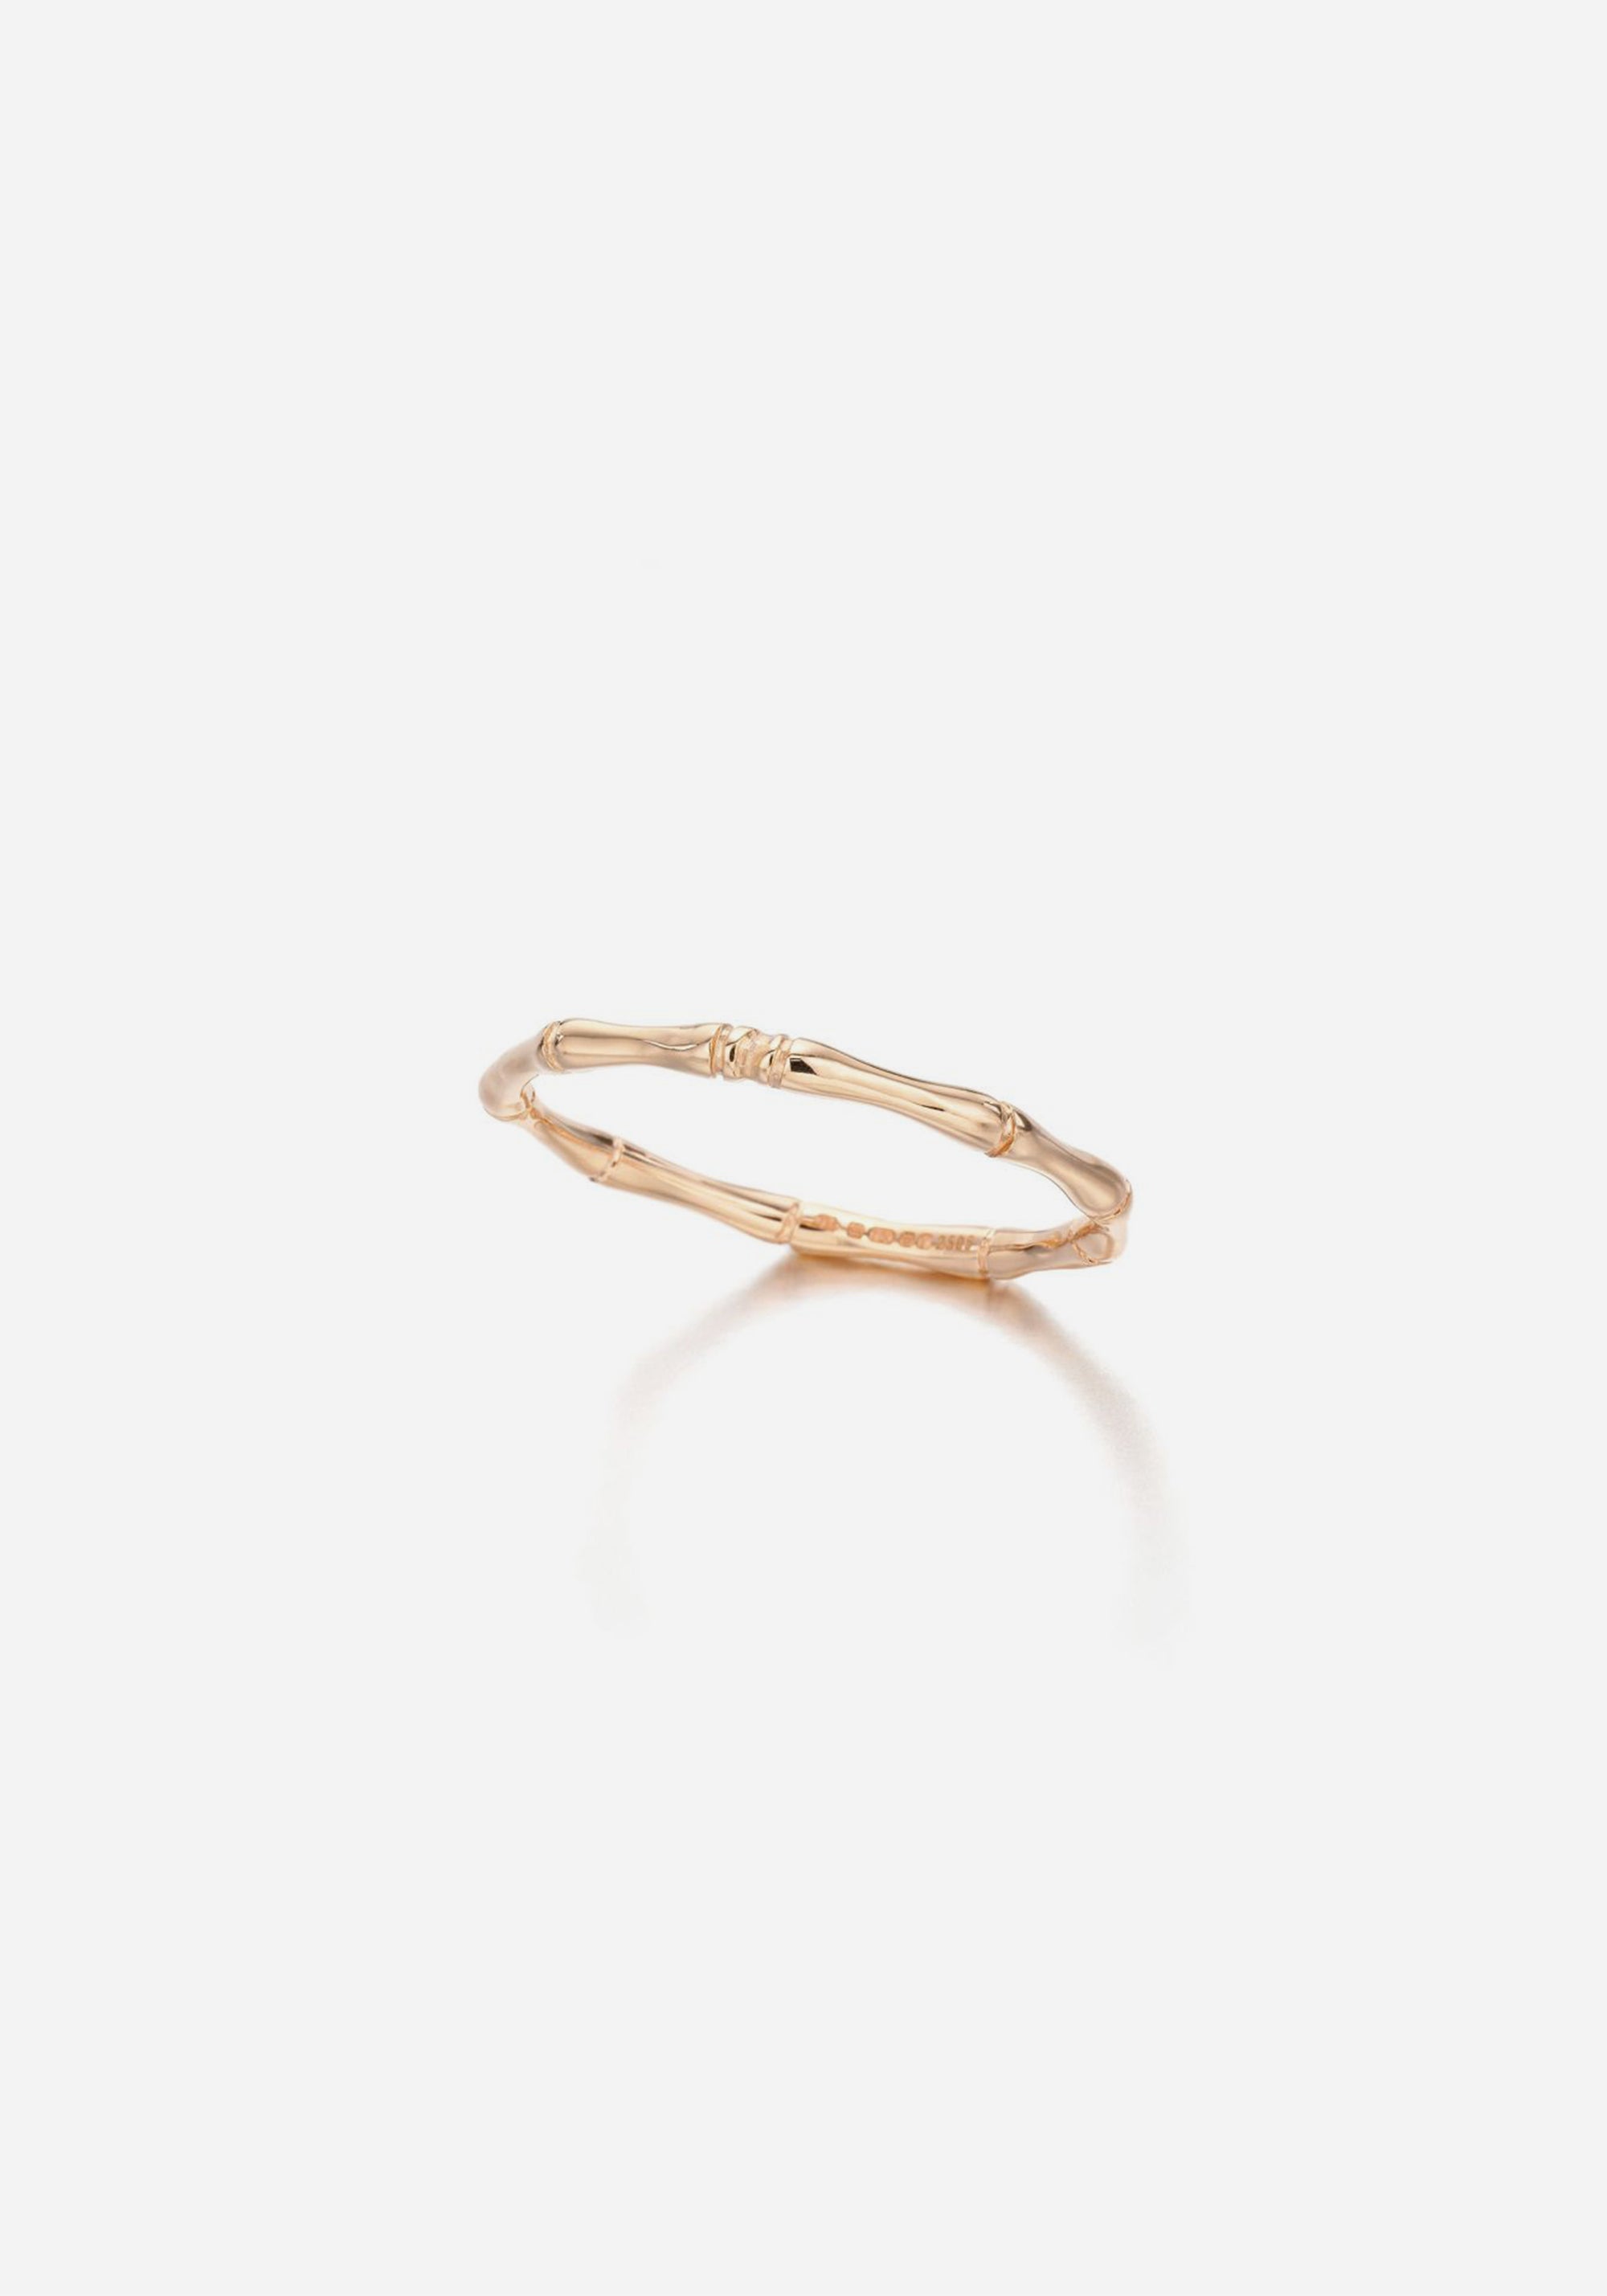 Bamboo Ring - Fine Band Rose Gold